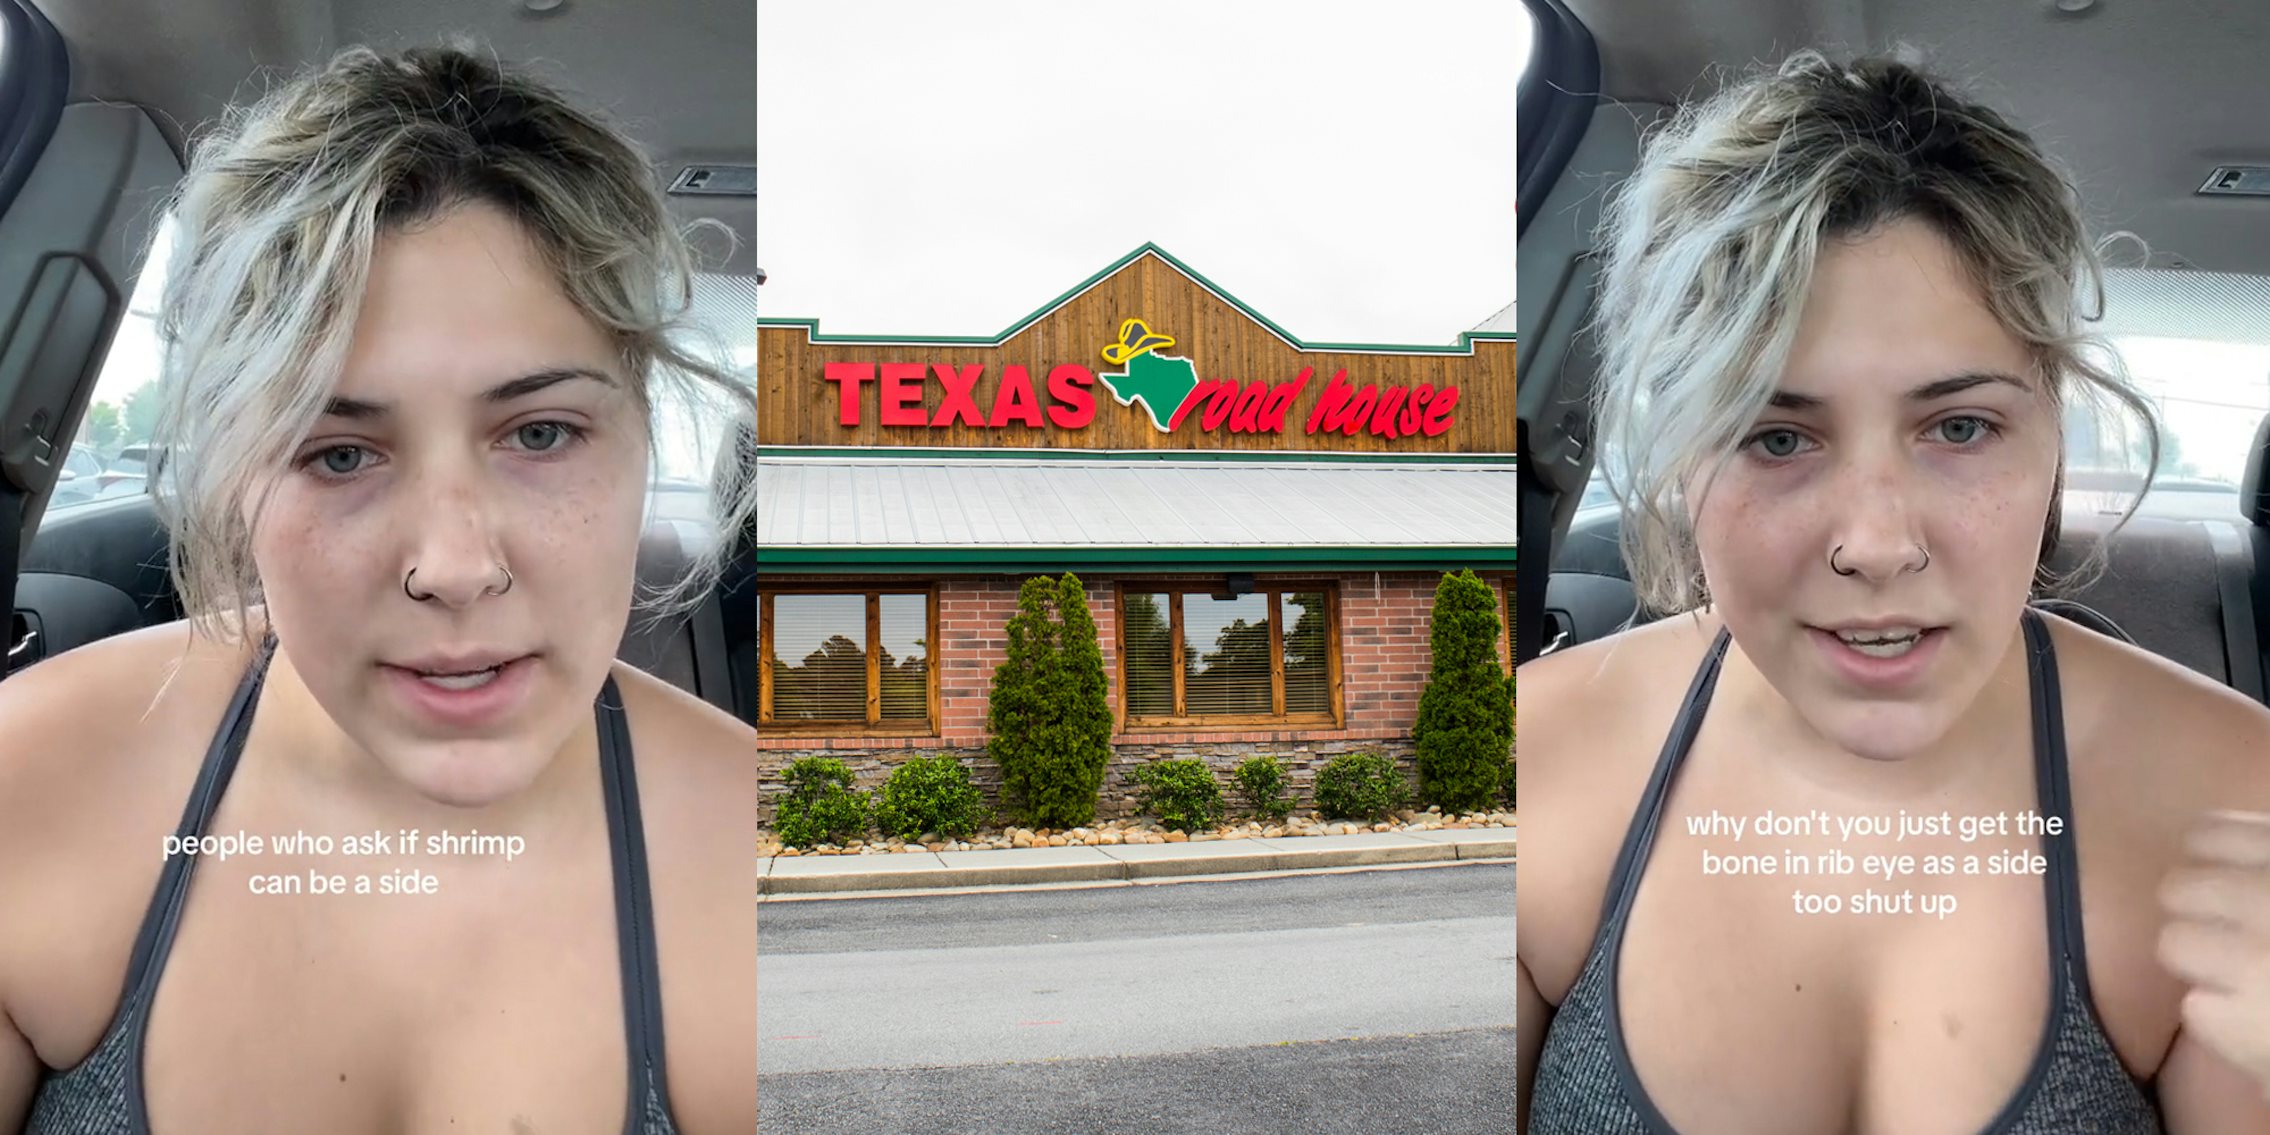 former Texas Roadhouse server speaking in car with caption 'people who ask if shrimp can be a side' (l) Texas Roadhouse building with sign (c) former Texas Roadhouse server speaking in car with caption 'why don't you just get the bone in rib eye as a side too shut up' (r)